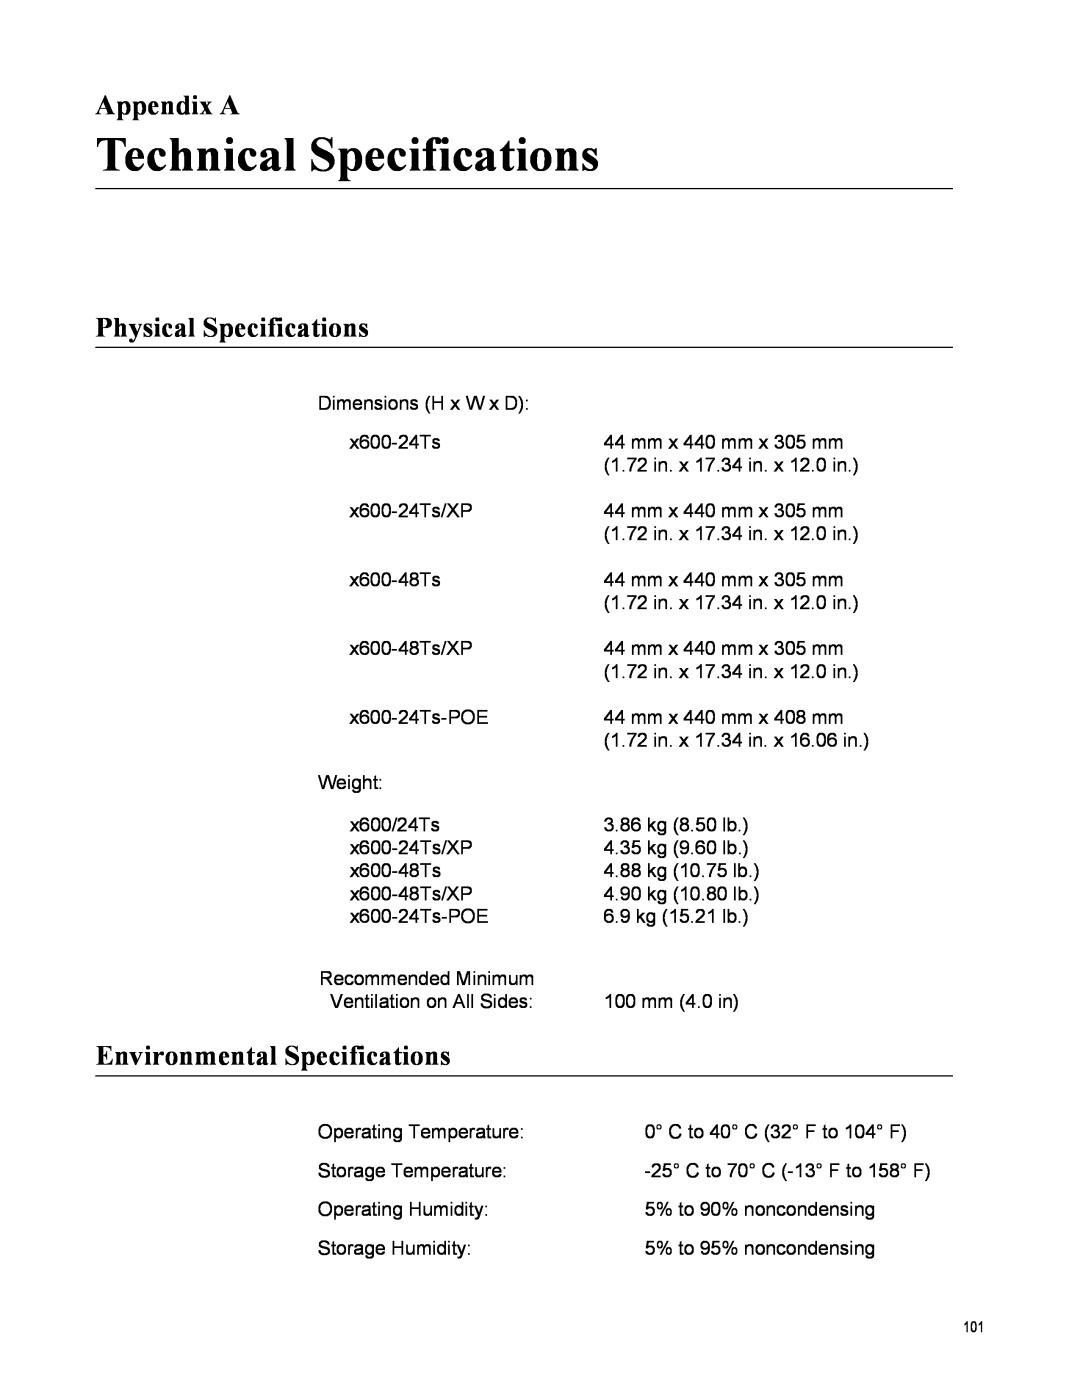 Allied Telesis x600-24Ts-POE Technical Specifications, Appendix A, Physical Specifications, Environmental Specifications 